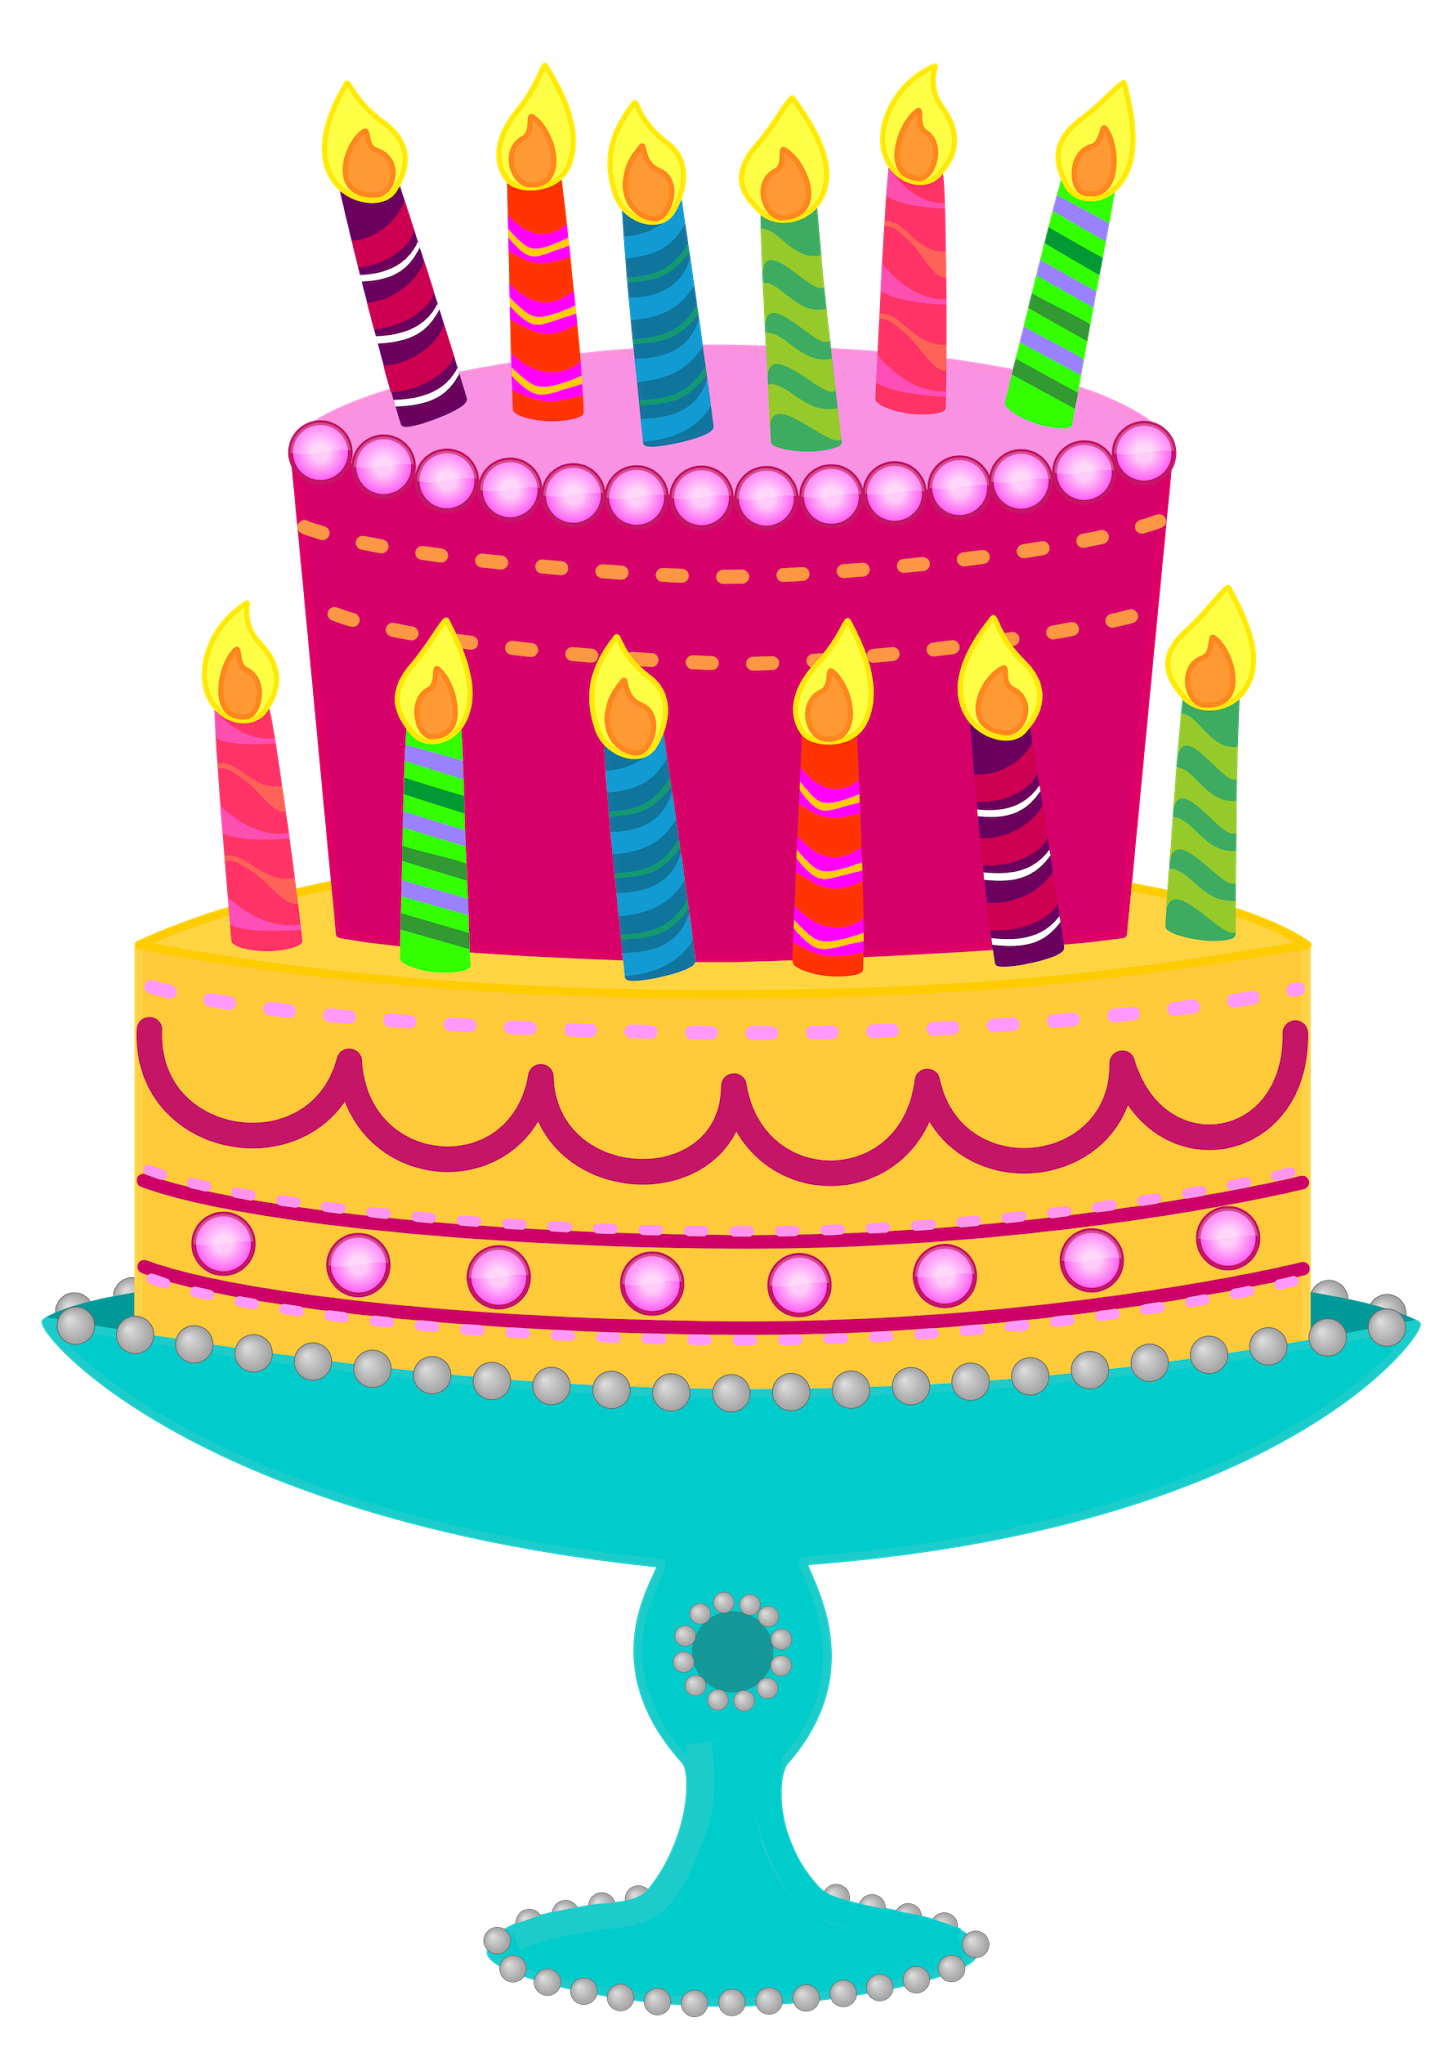 Free Clipart Birthday Cake With Candles - Birthday Cake Clipart, Transparent background PNG HD thumbnail